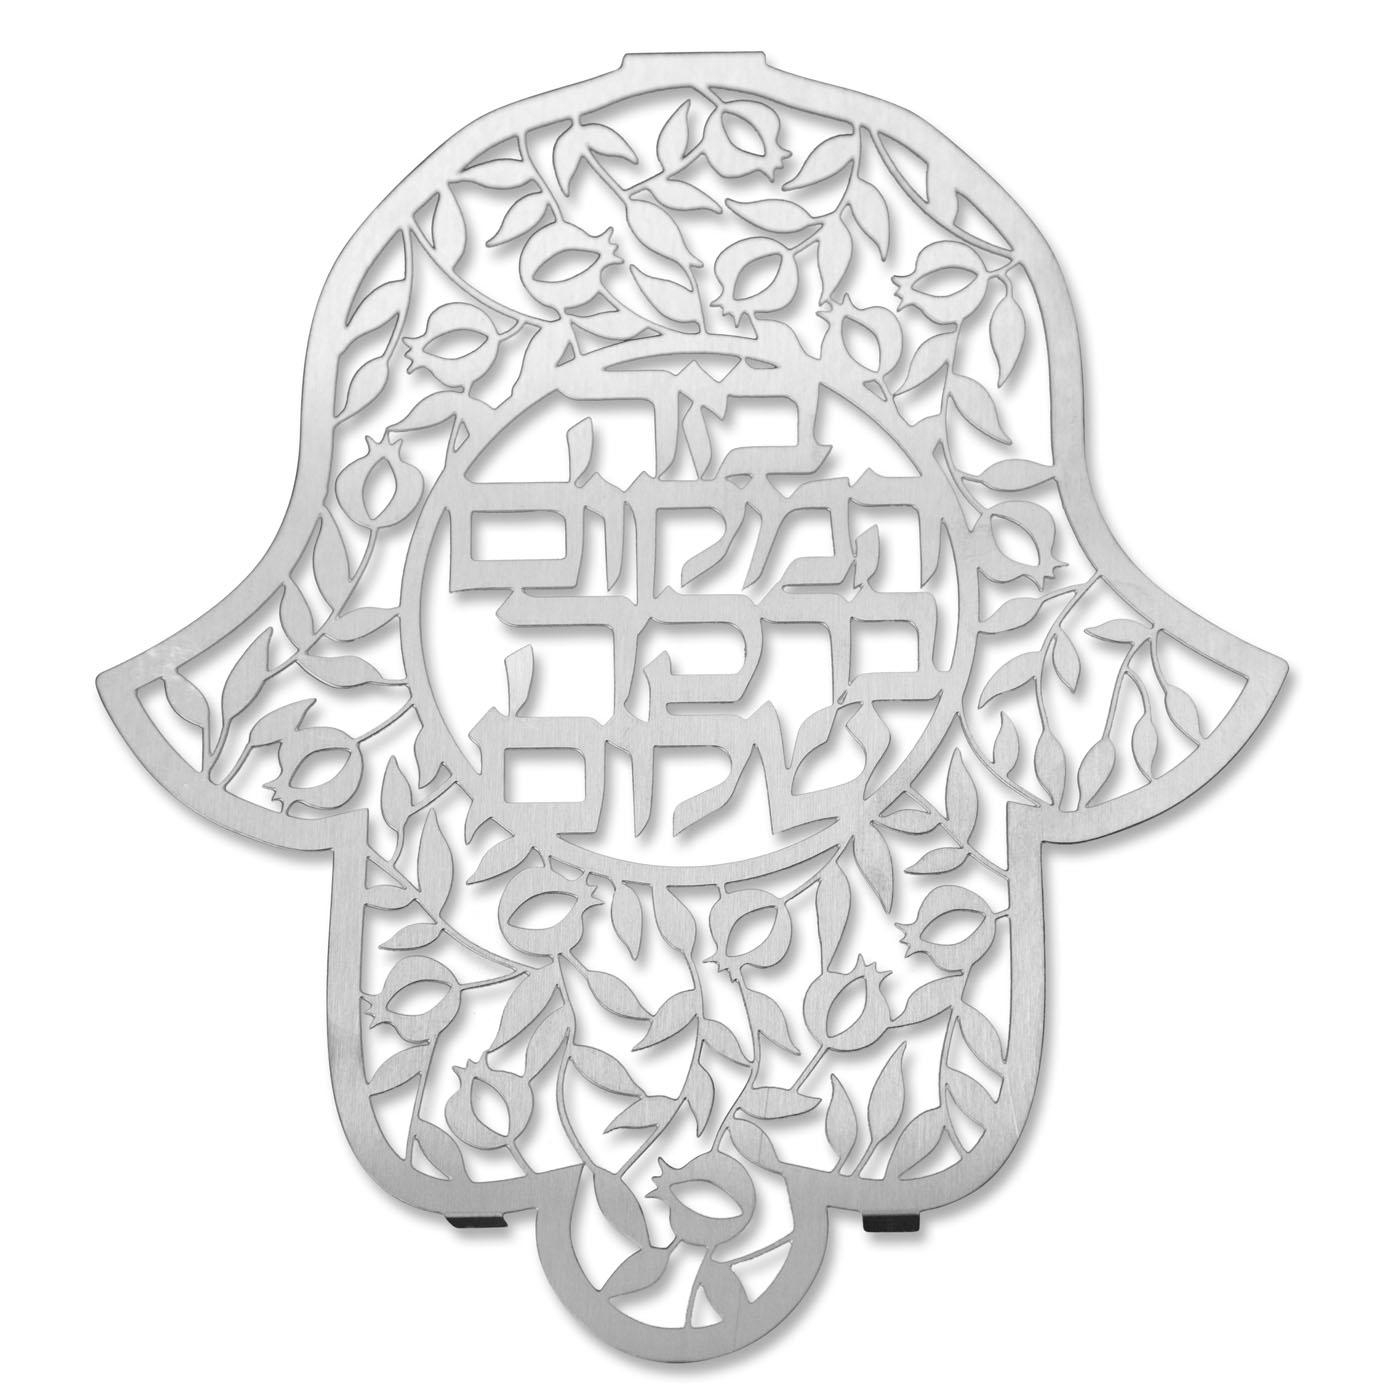 Dorit Judaica Stainless Steel Hamsa Wall Hanging - House Blessing - 1